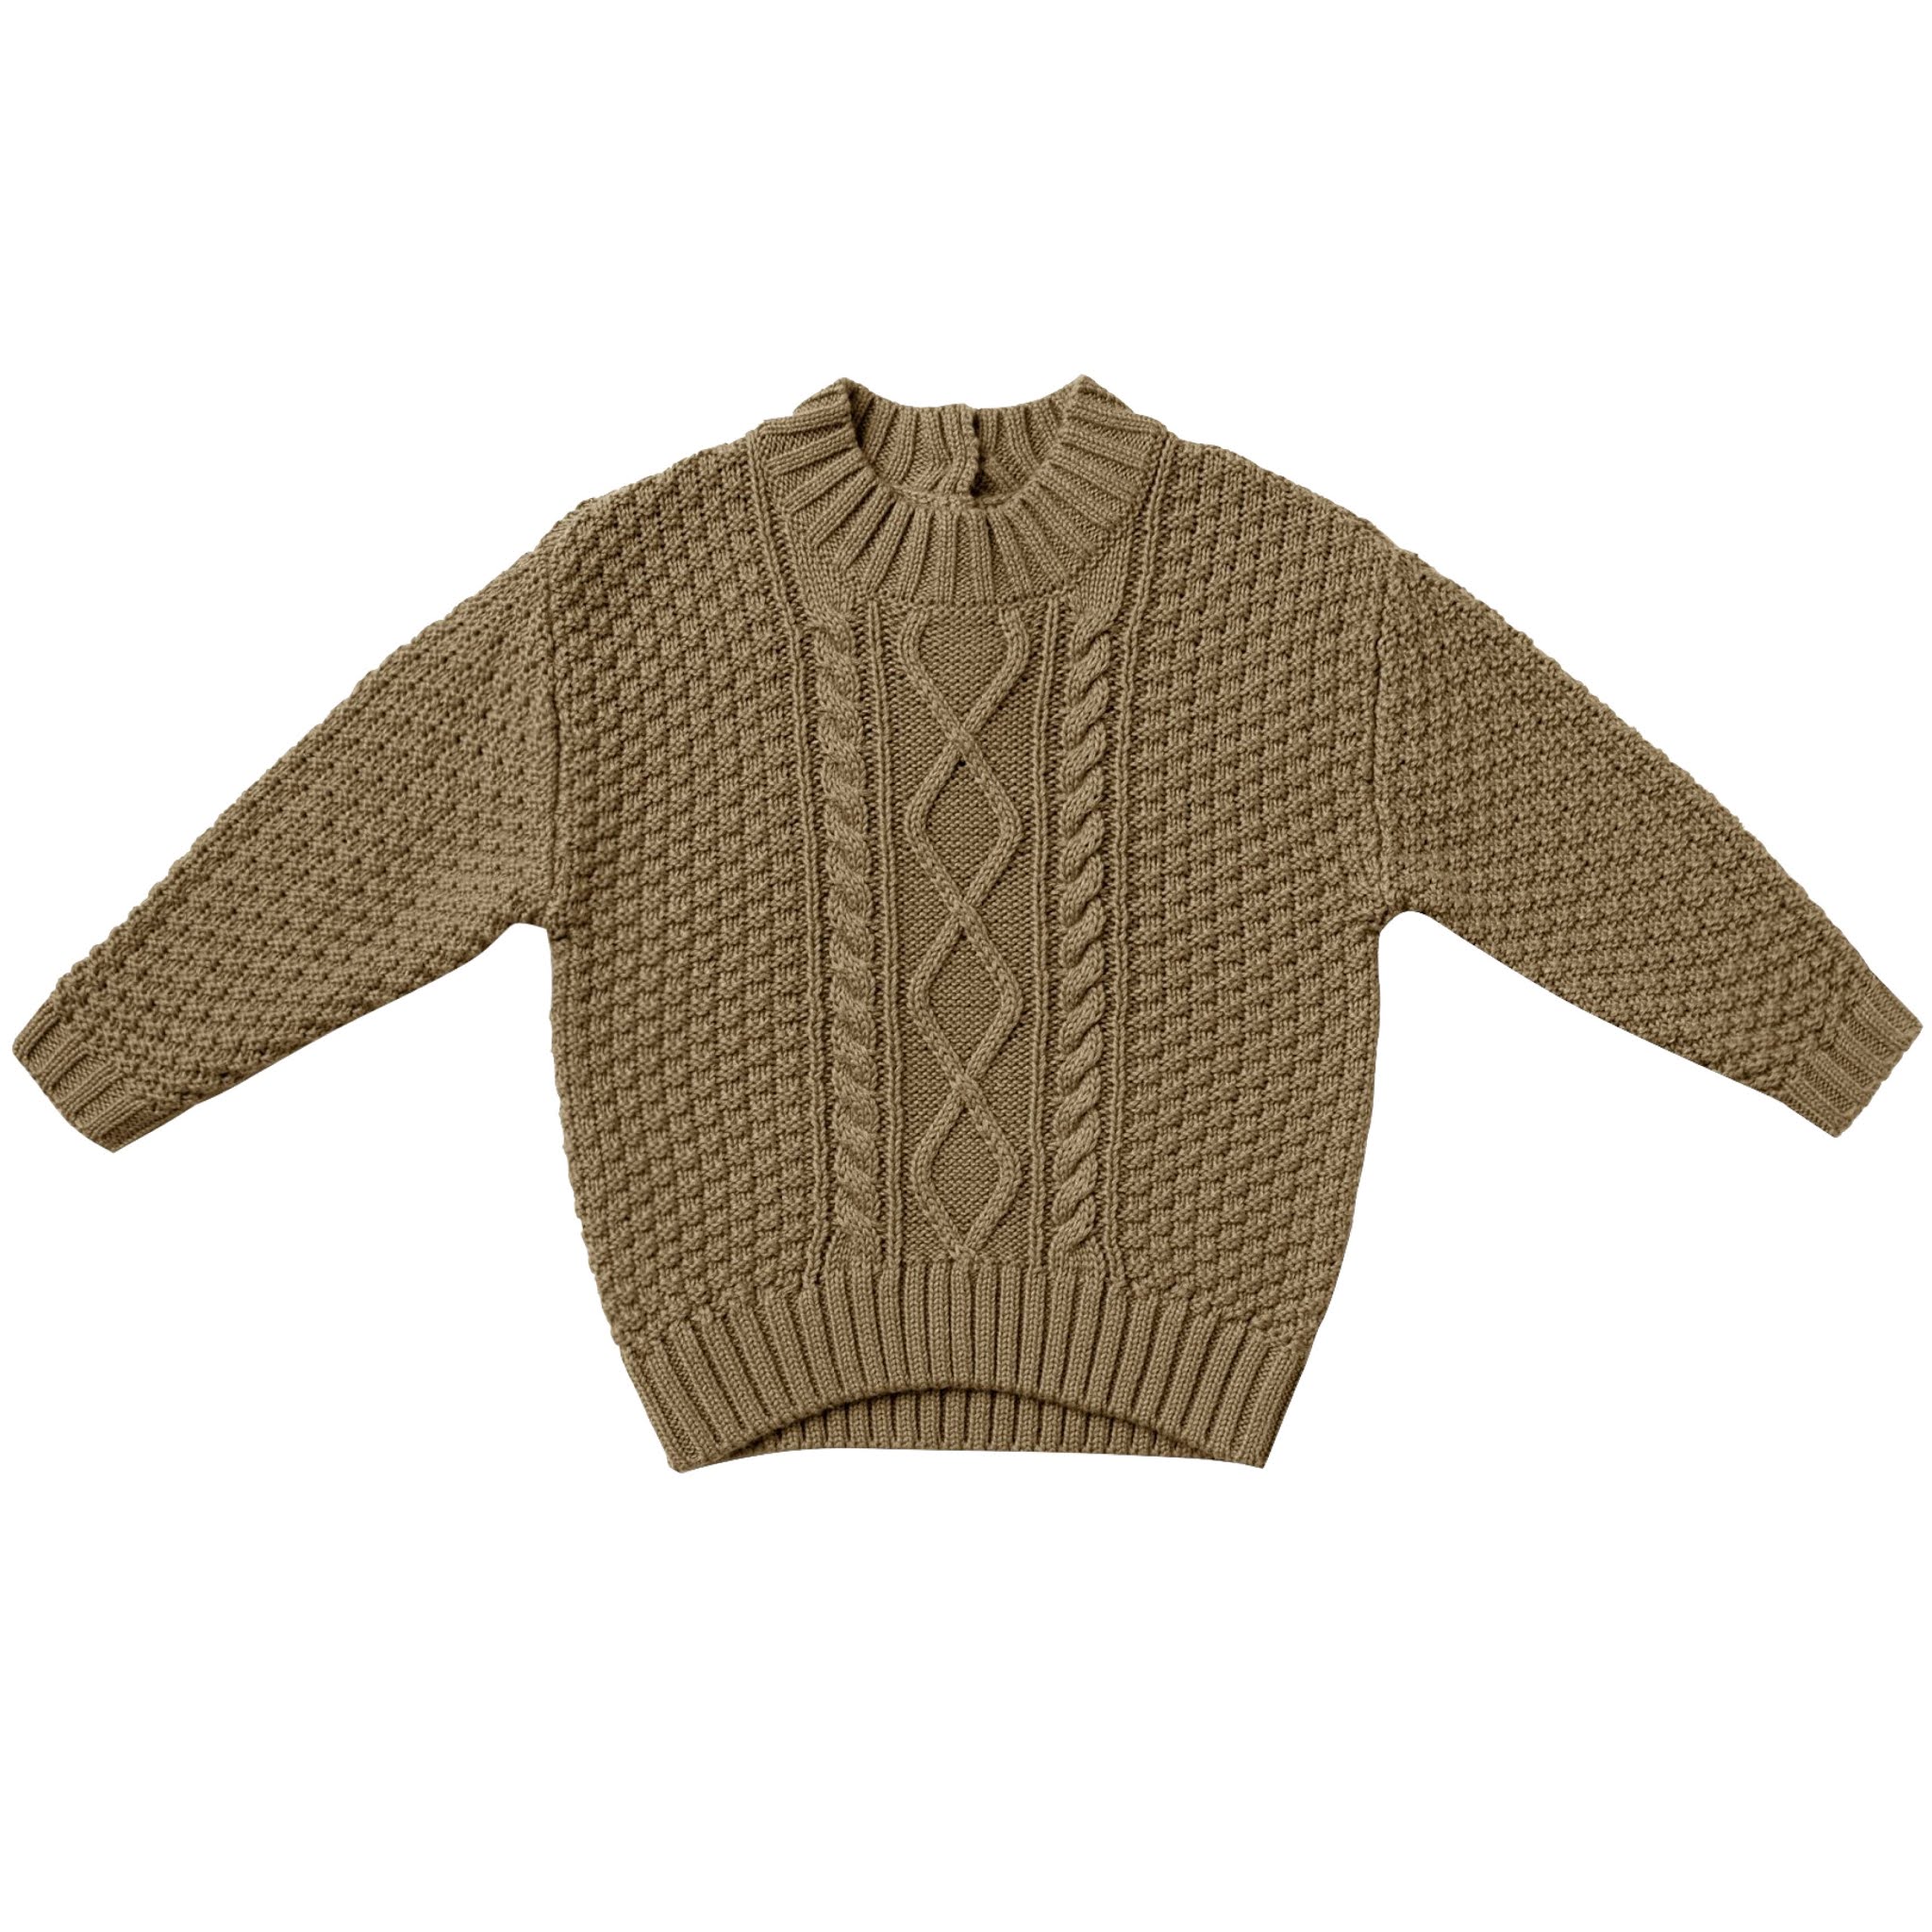 Kids Olive Cable Knit Sweater from Quincy Mae